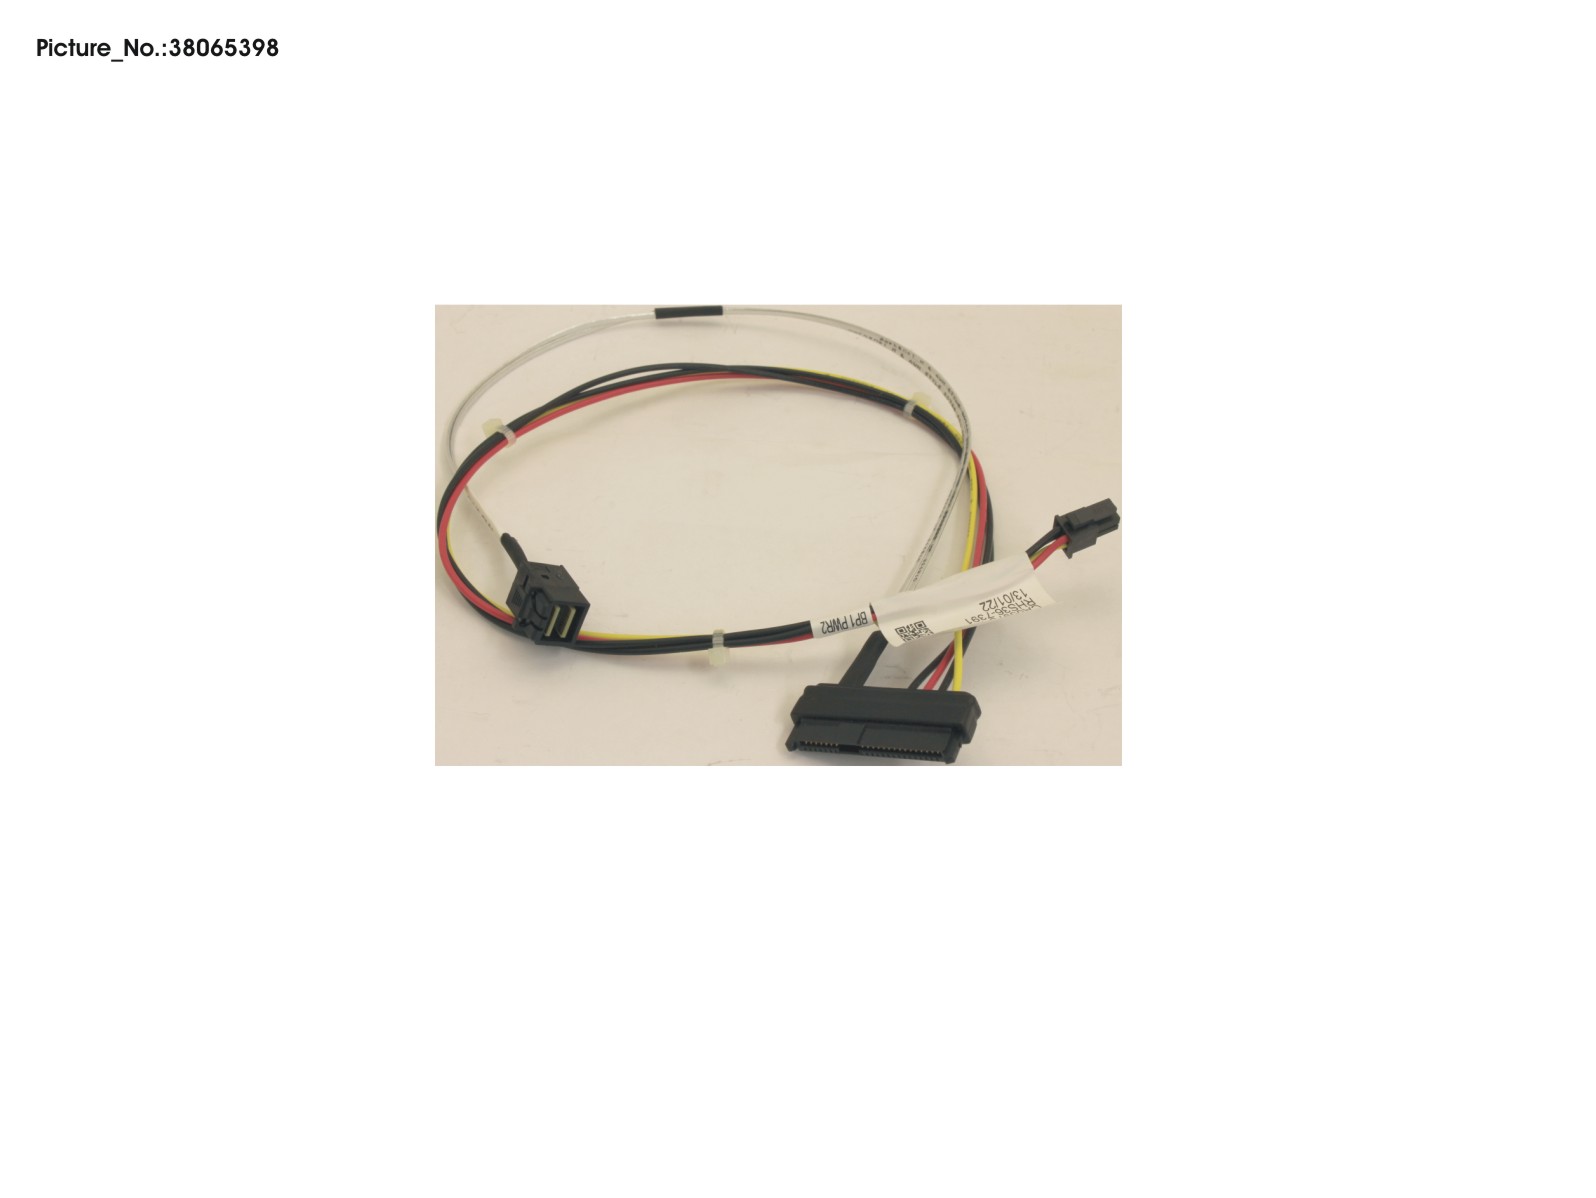 LTO PWR/SIGNAL CABLE